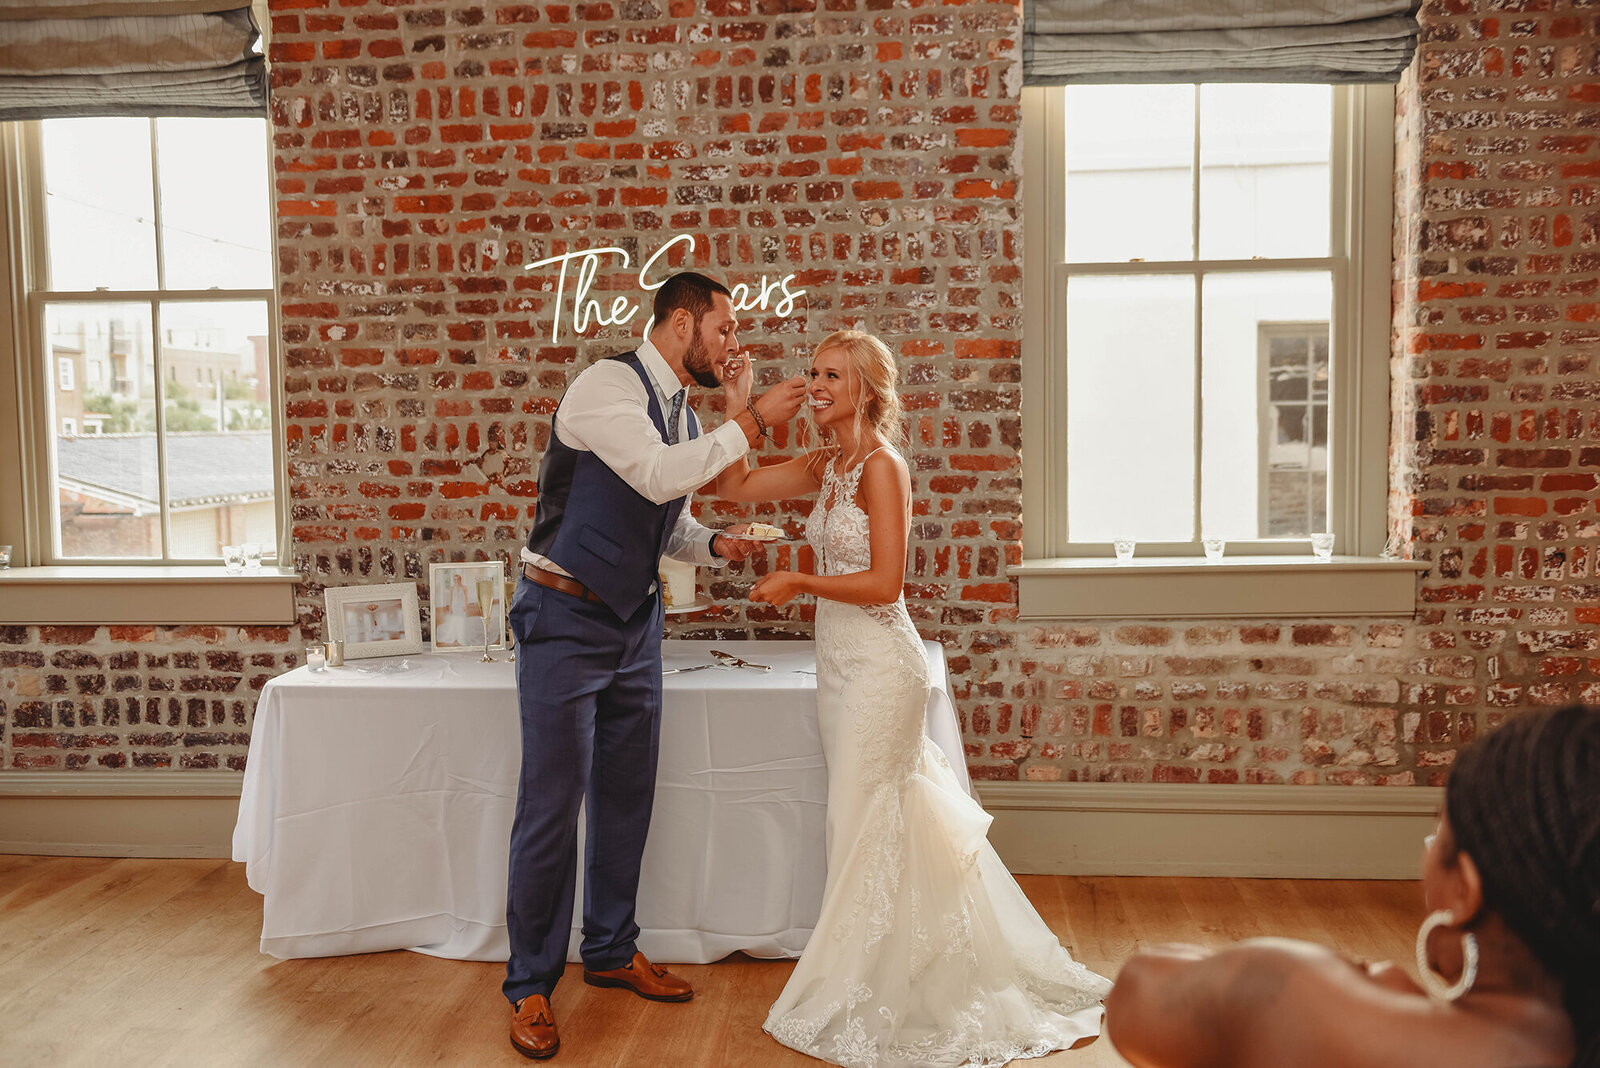 Newlyweds feed each other cake during Micro-Wedding Reception in Charleston, SC.